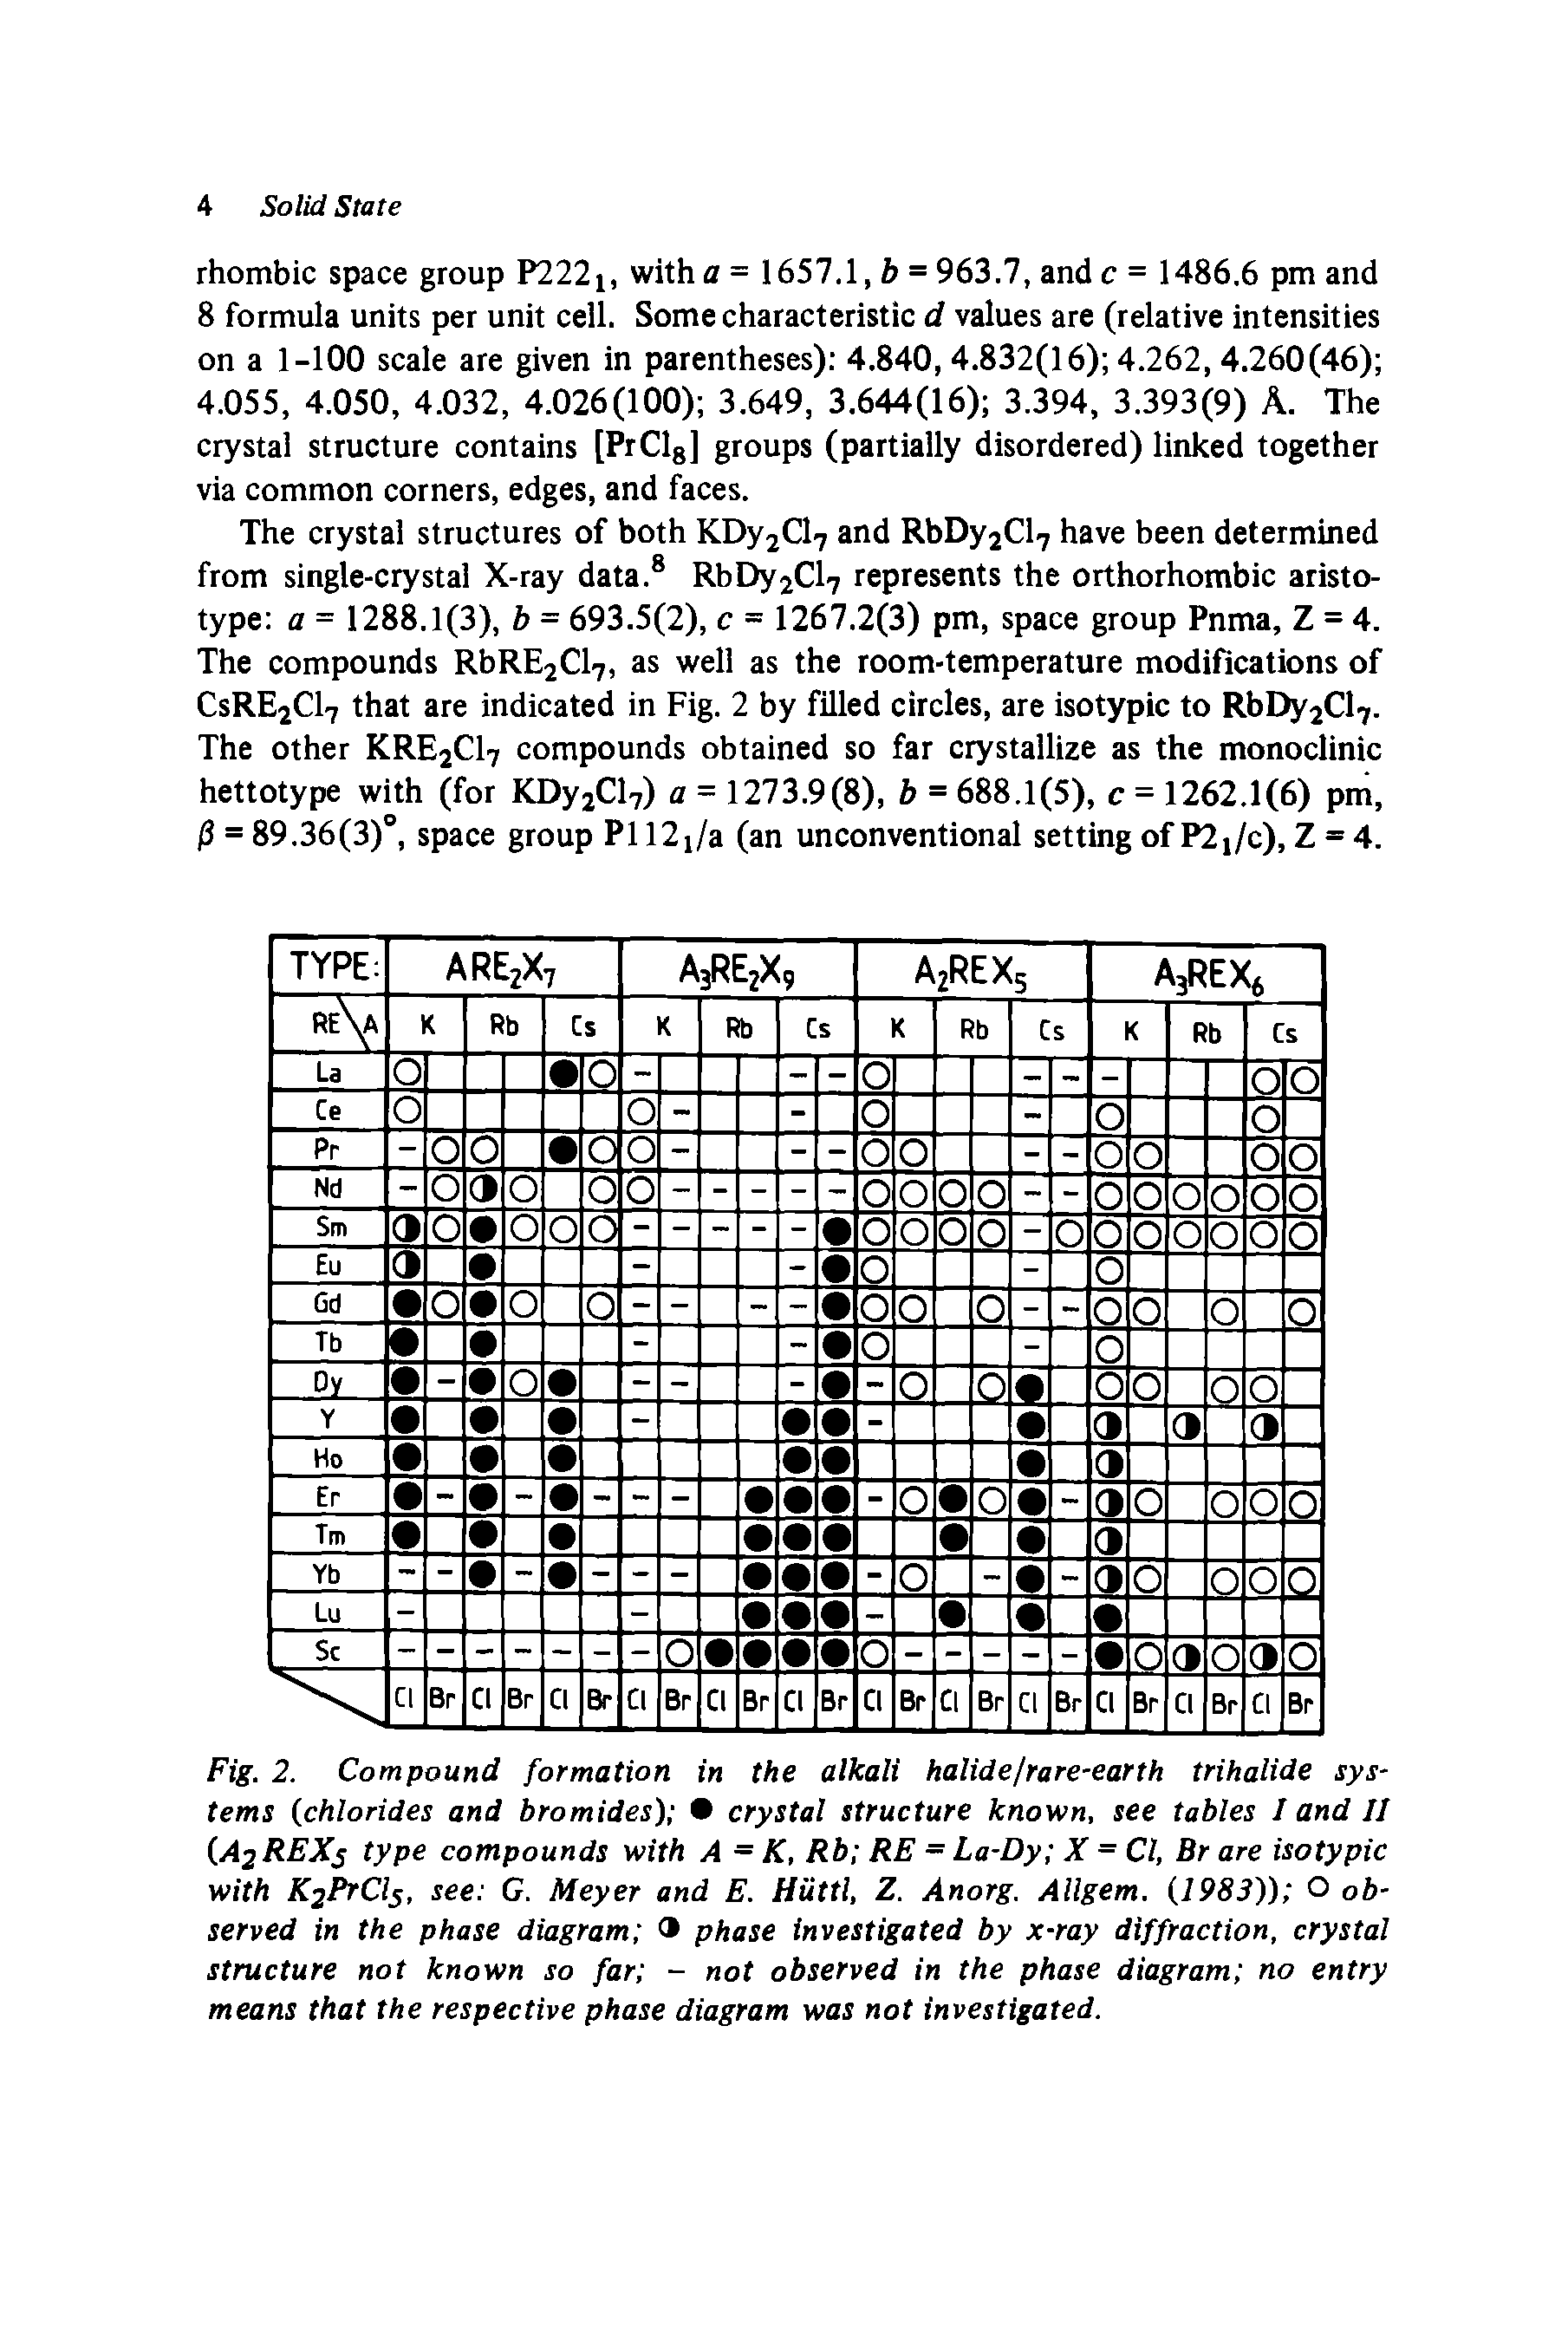 Fig. 2. Compound formation in the alkali halide/rare-earth trihalide systems (chlorides and bromides) crystal structure known, see tables I and II (AjREXs tyPe compounds with A = K, Rb RE - La-Dy X = Cl, Br are isotypic with K2PTCI5, see G. Meyer and E. Hiittl, Z. Anorg. Allgem. (1983)) O observed in the phase diagram phase investigated by x-ray diffraction, crystal structure not known so far - not observed in the phase diagram no entry means that the respective phase diagram was not investigated.